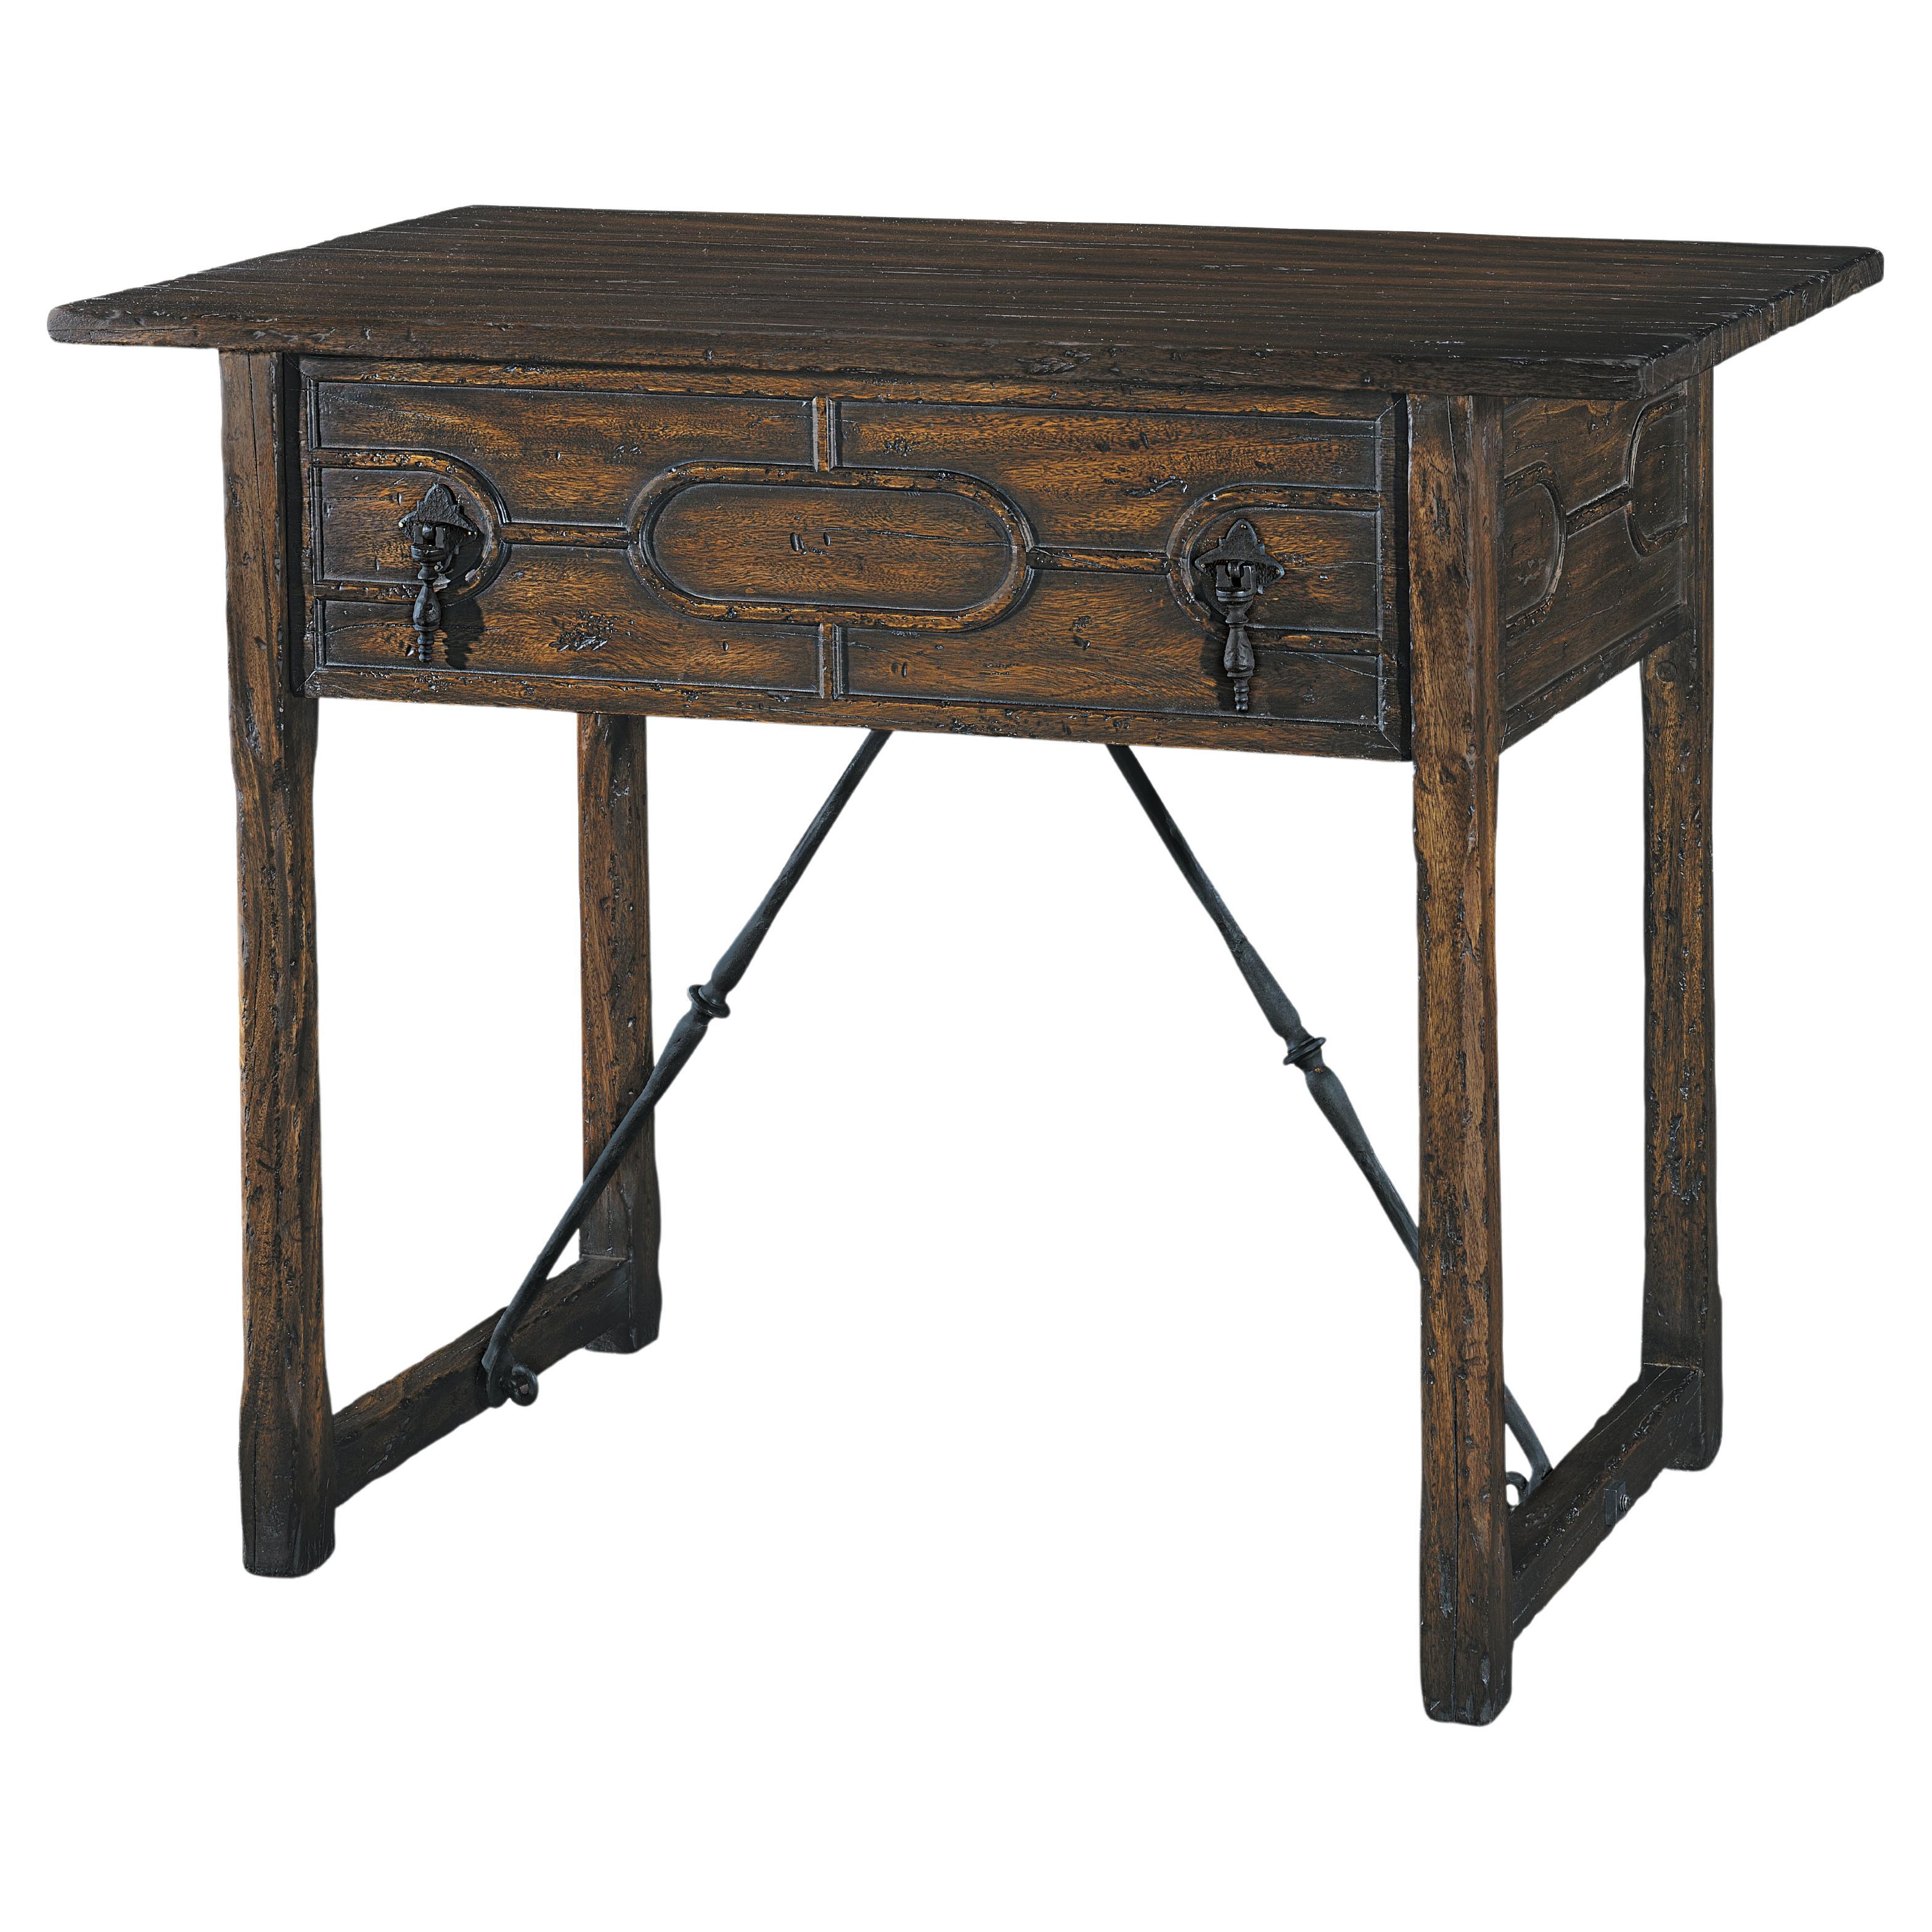 Salamanca lamp table w/ drawer decorated w/ moldings, square legs & a metal wind For Sale